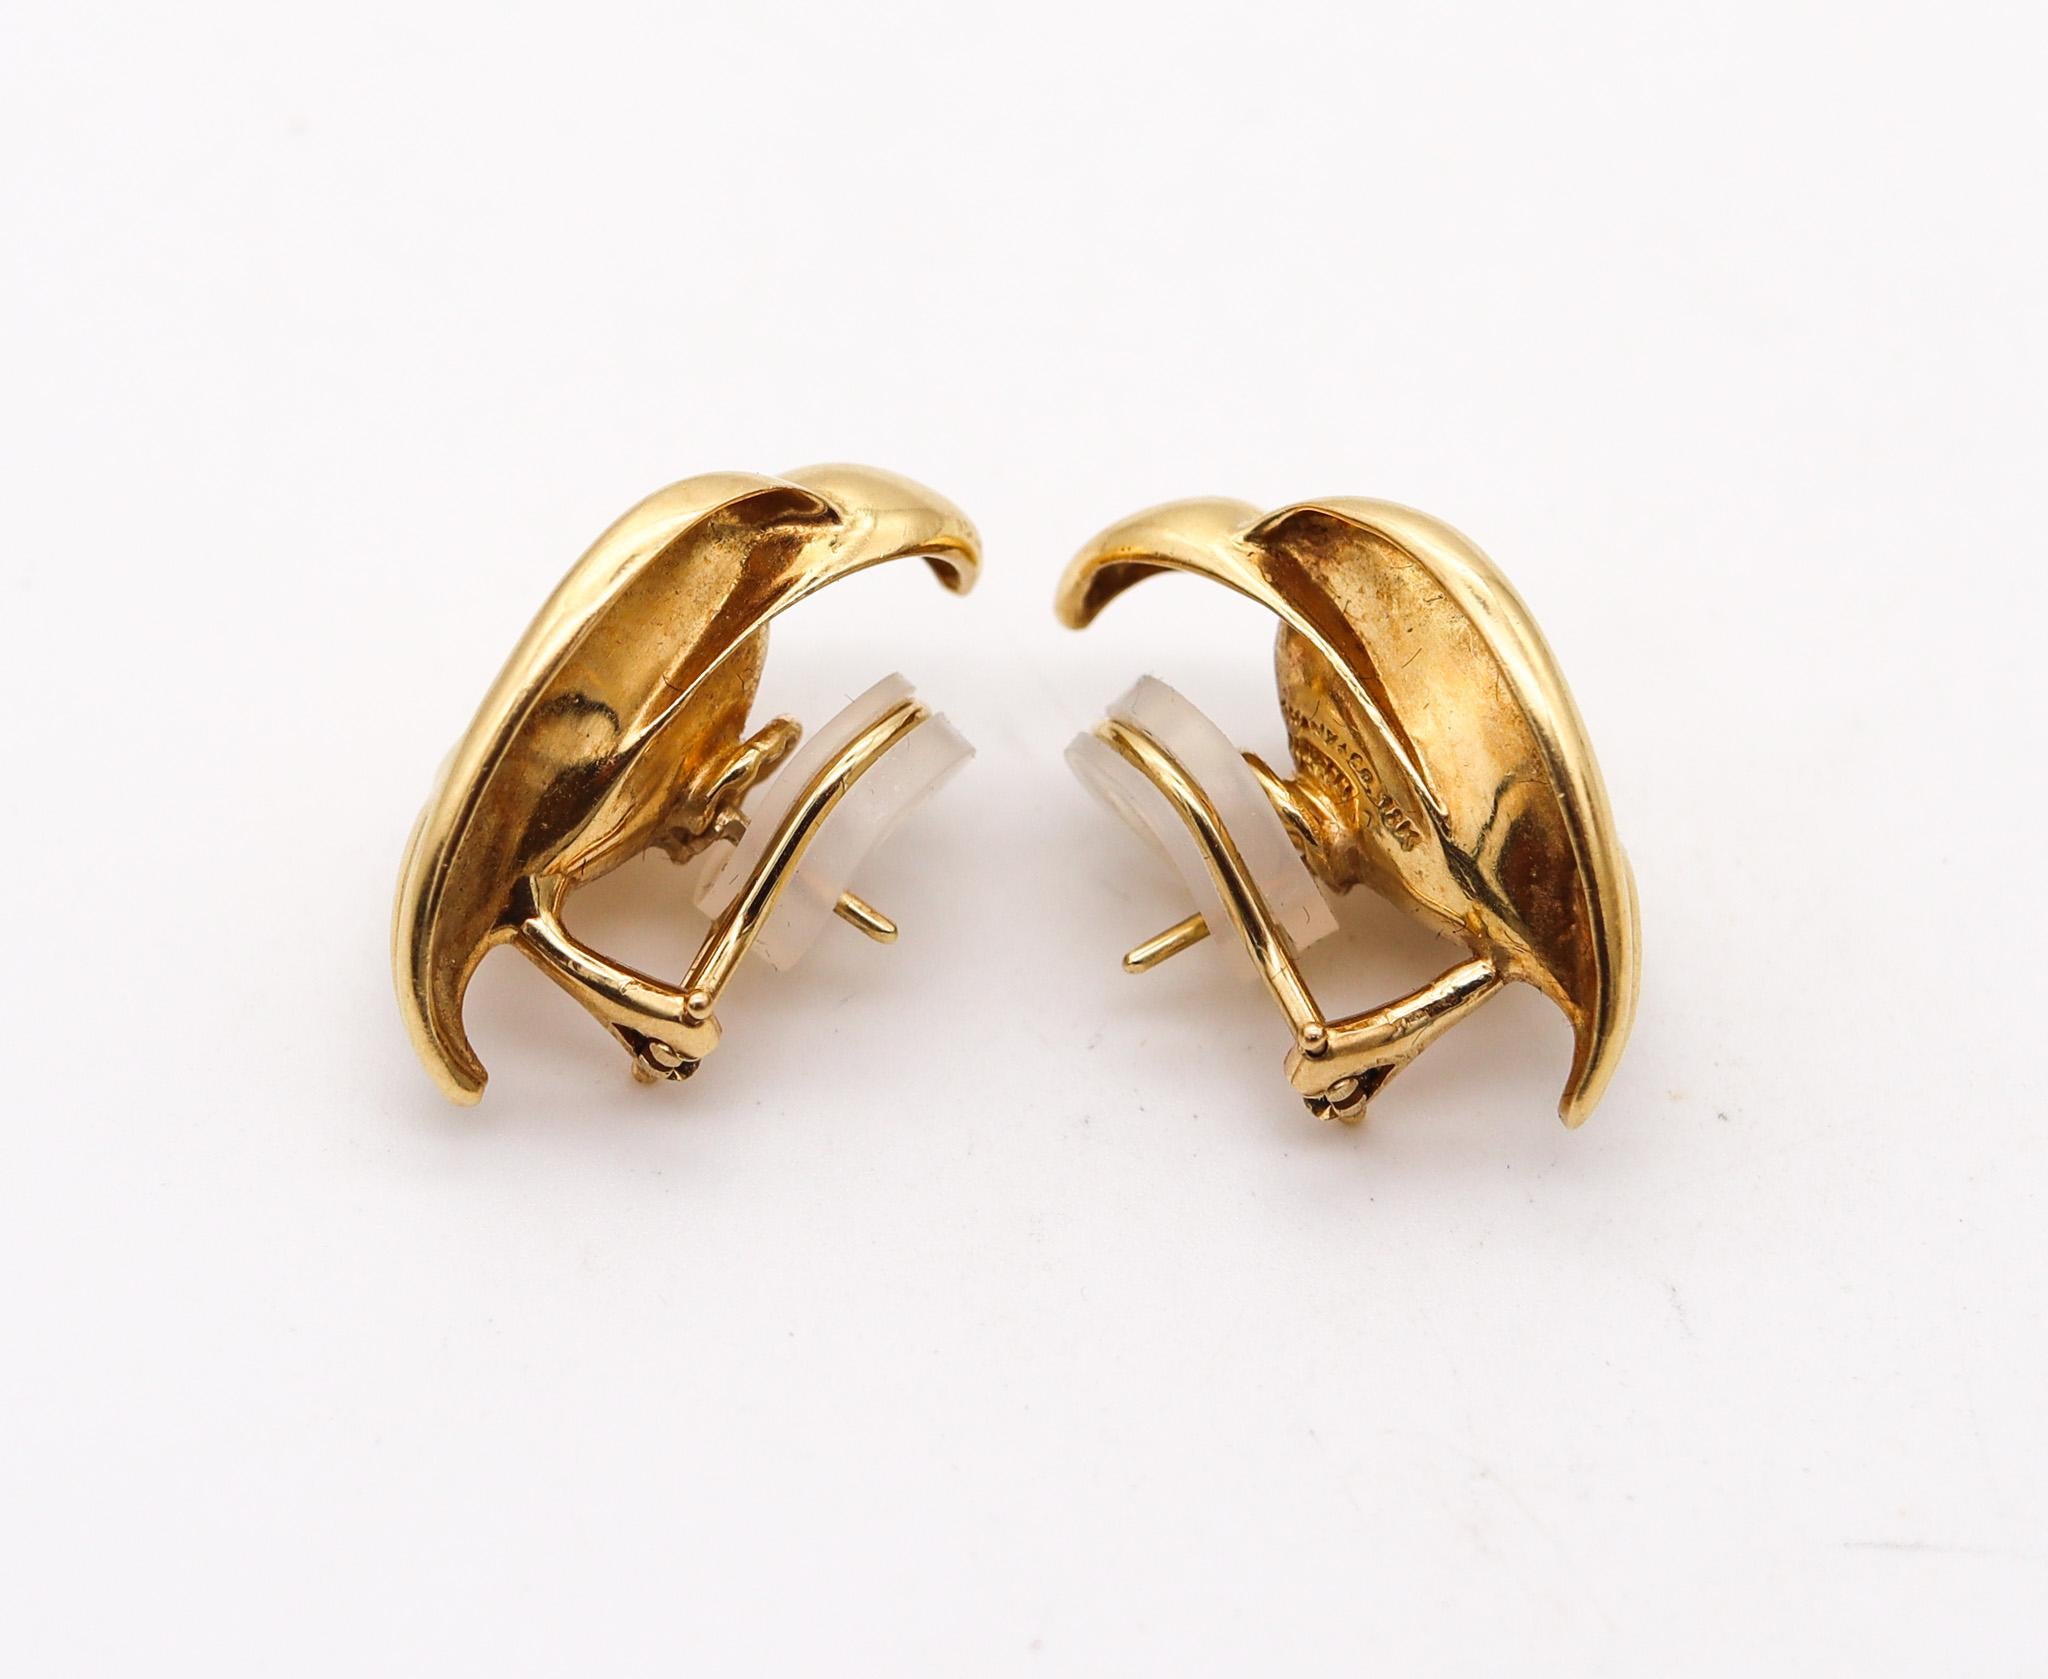 Modernist Tiffany & Co. 1977 Elsa Peretti Lily Calla Flowers Earrings In 18Kt Yellow Gold For Sale